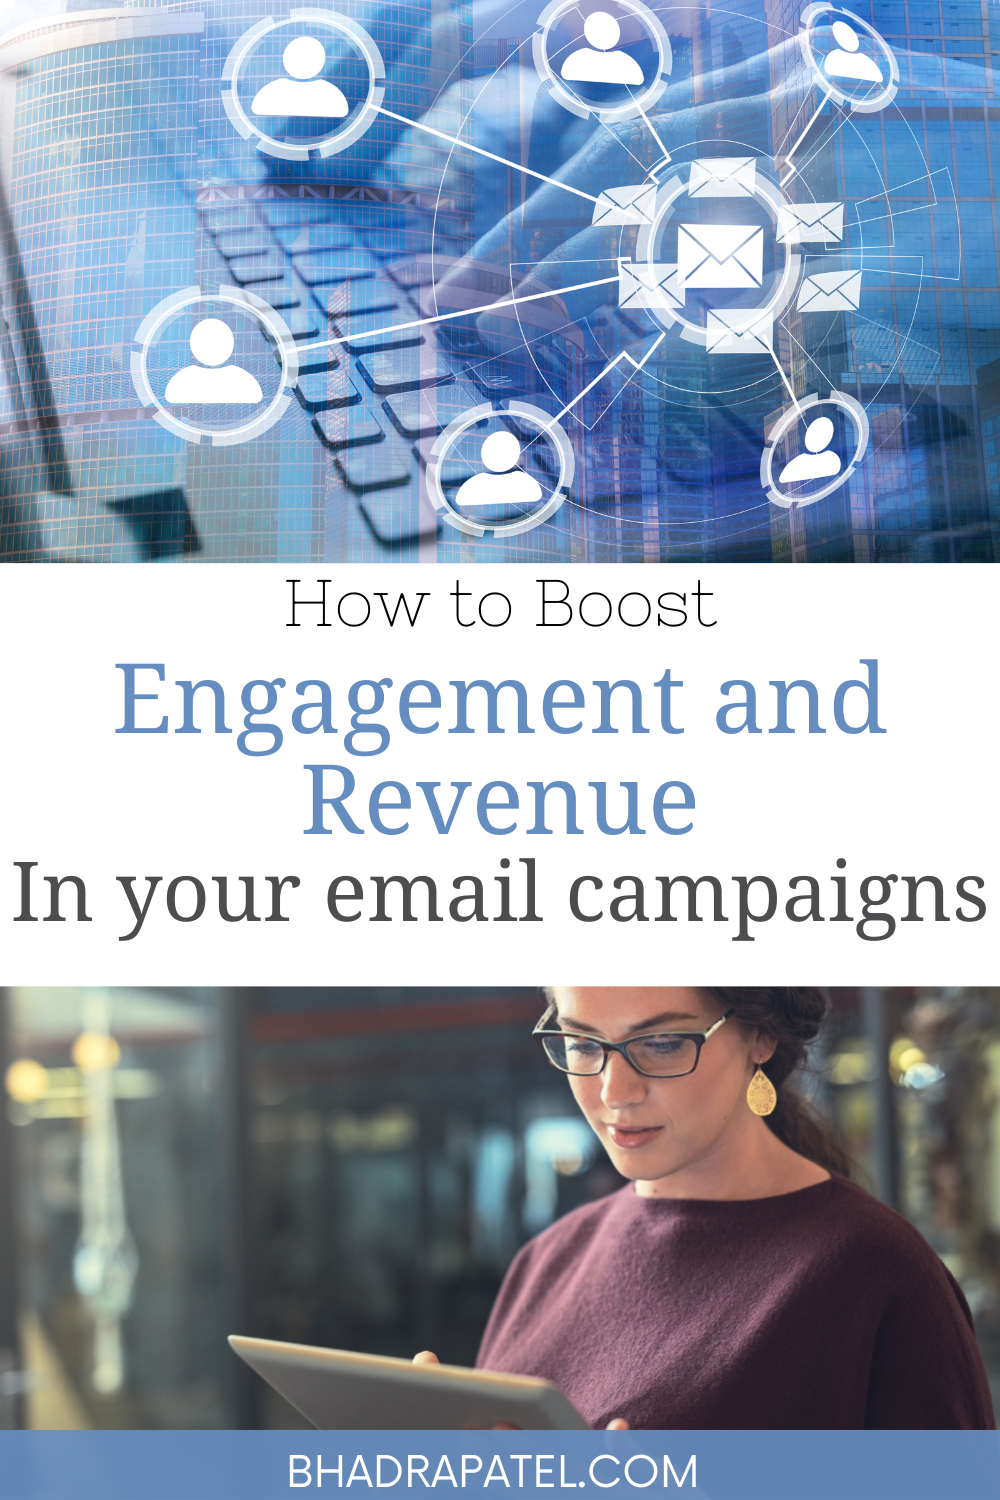 How to Boost Engagement and Revenue In your email campaigns